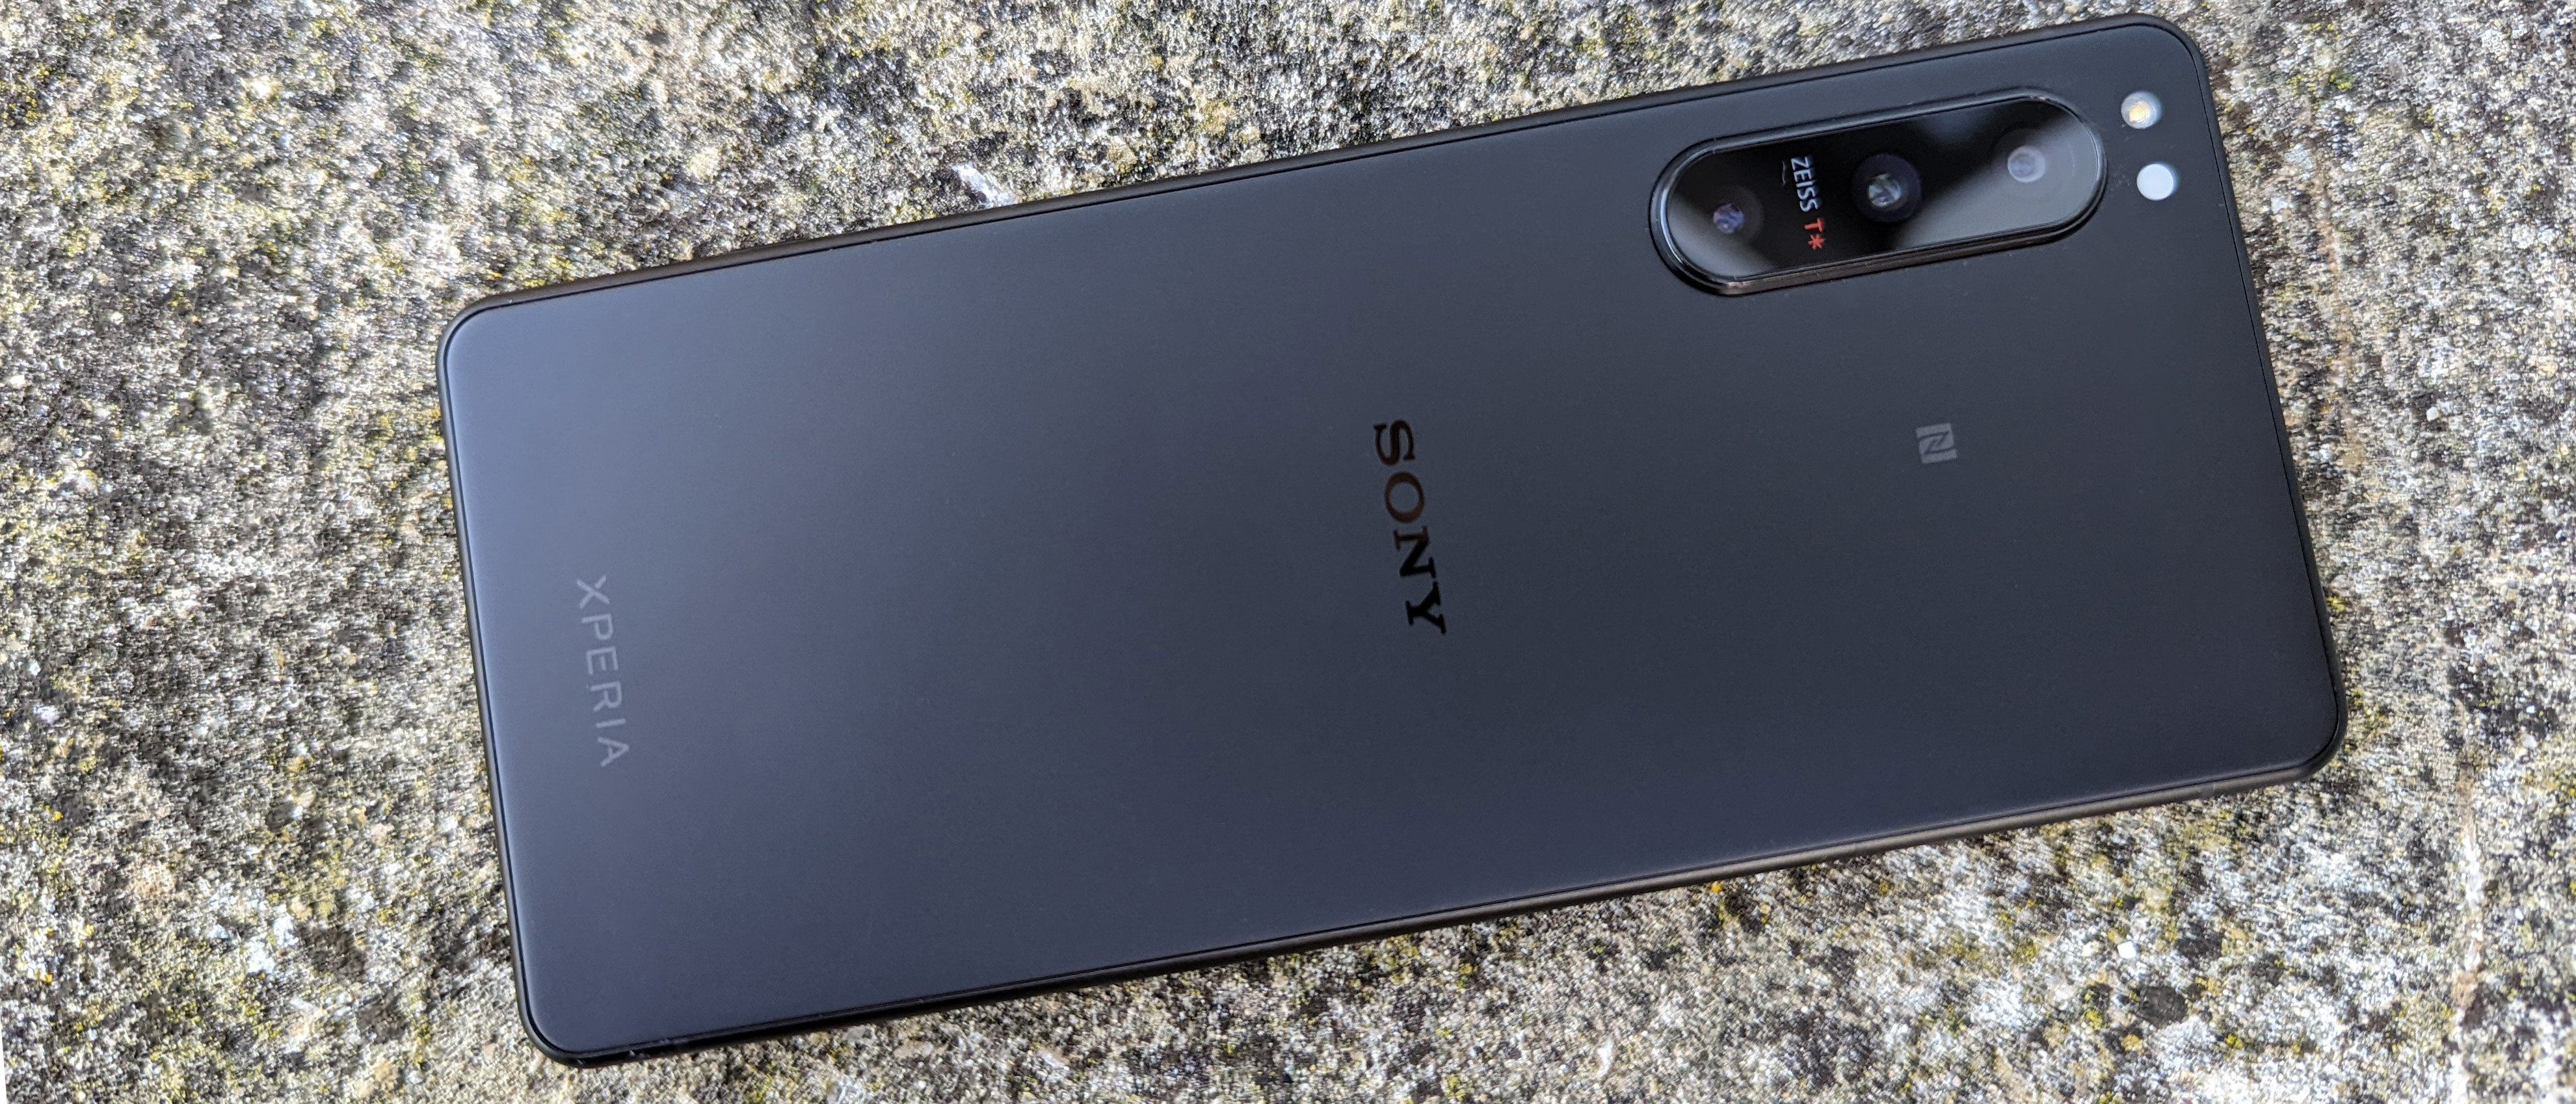 Sony Xperia 5 IV review: The perfect smartphone?